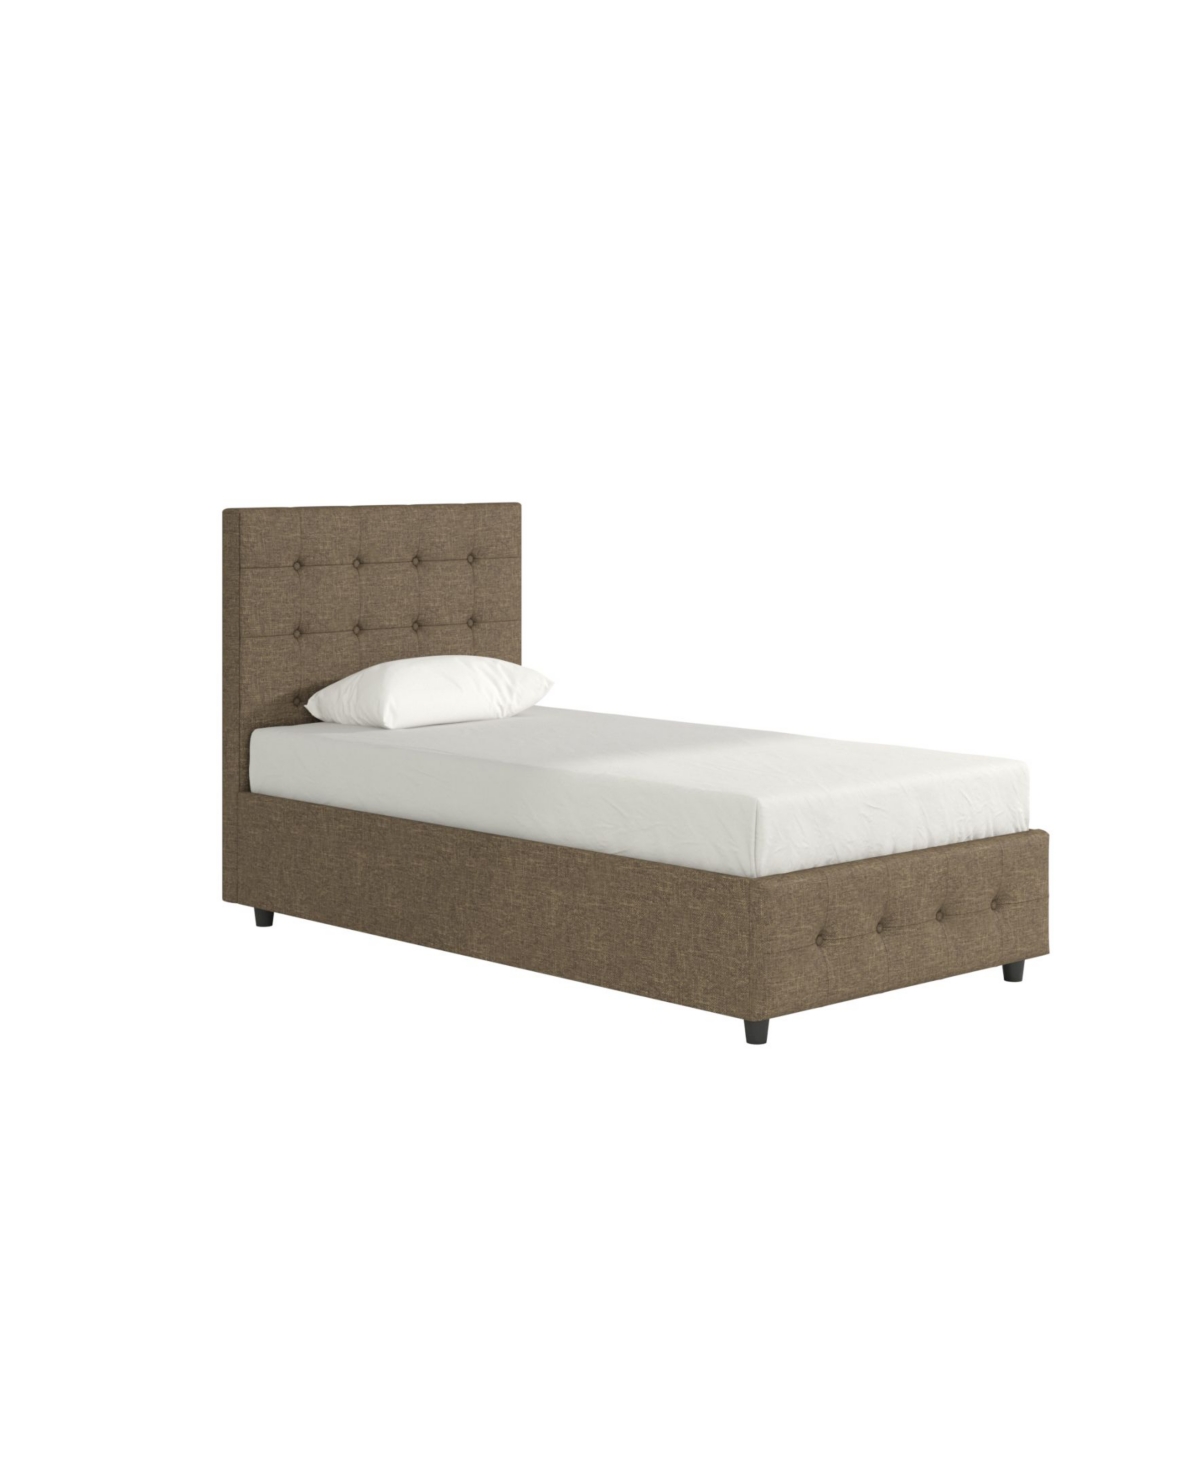 Atwater Living Sydney Upholstered Bed, Twin